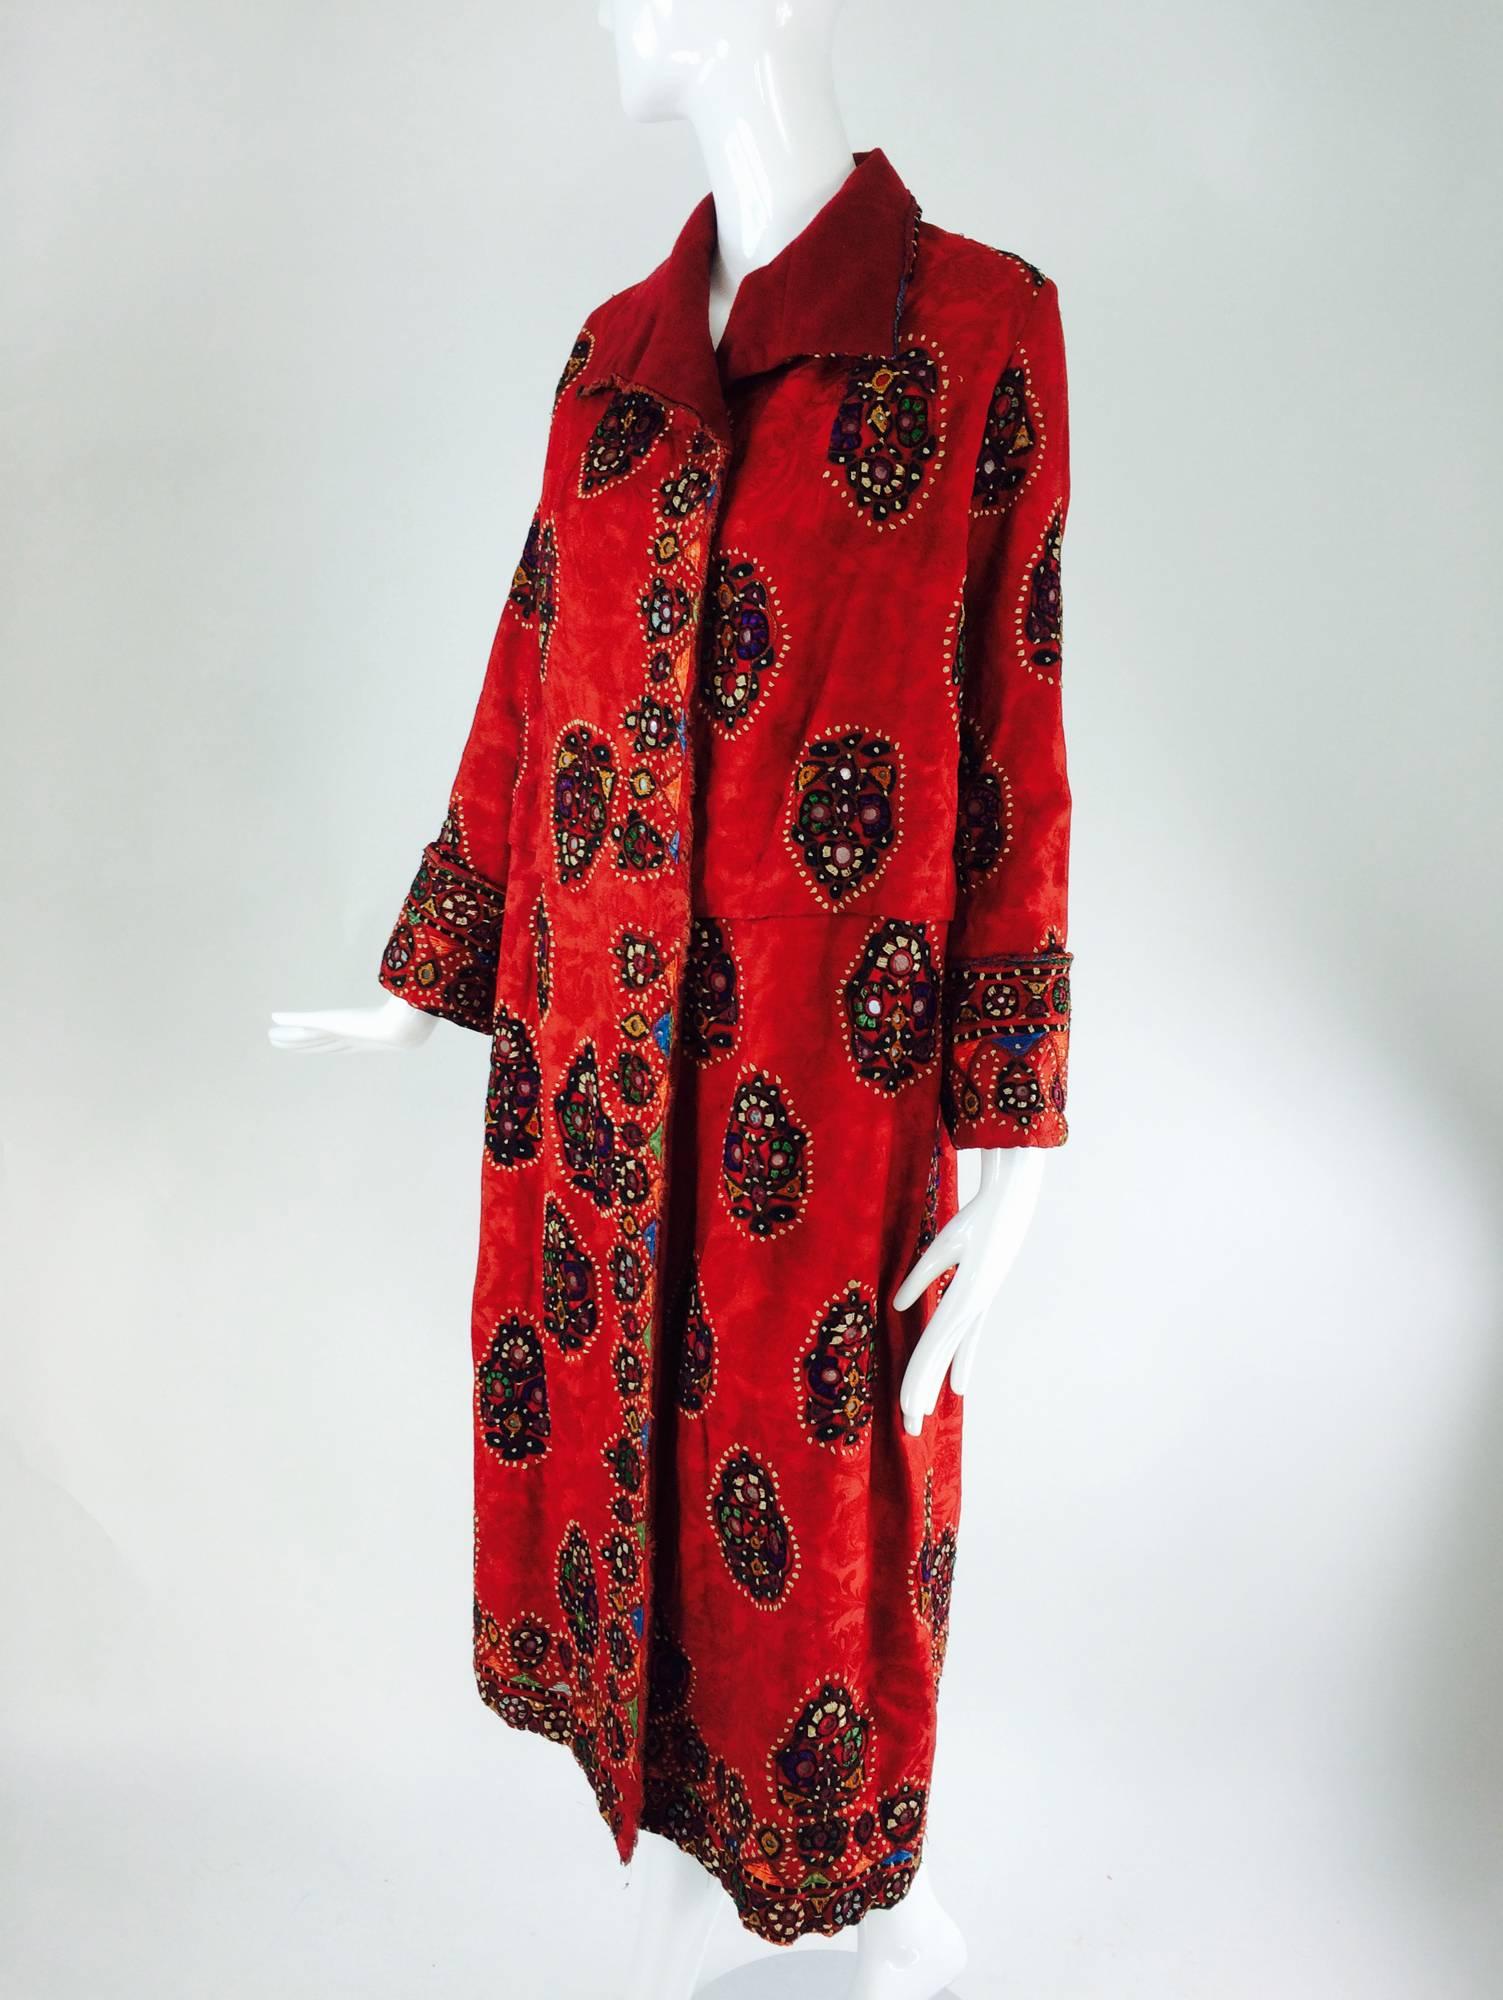 1920s Shisha (mirror embroidery) embroidered flapper style coat India...Beautifully embroidered coat done on a cotton damask fabric in a pomegranate colour...Embroidered medallions are scattered throughout the coat and are done in a fine buttonhole